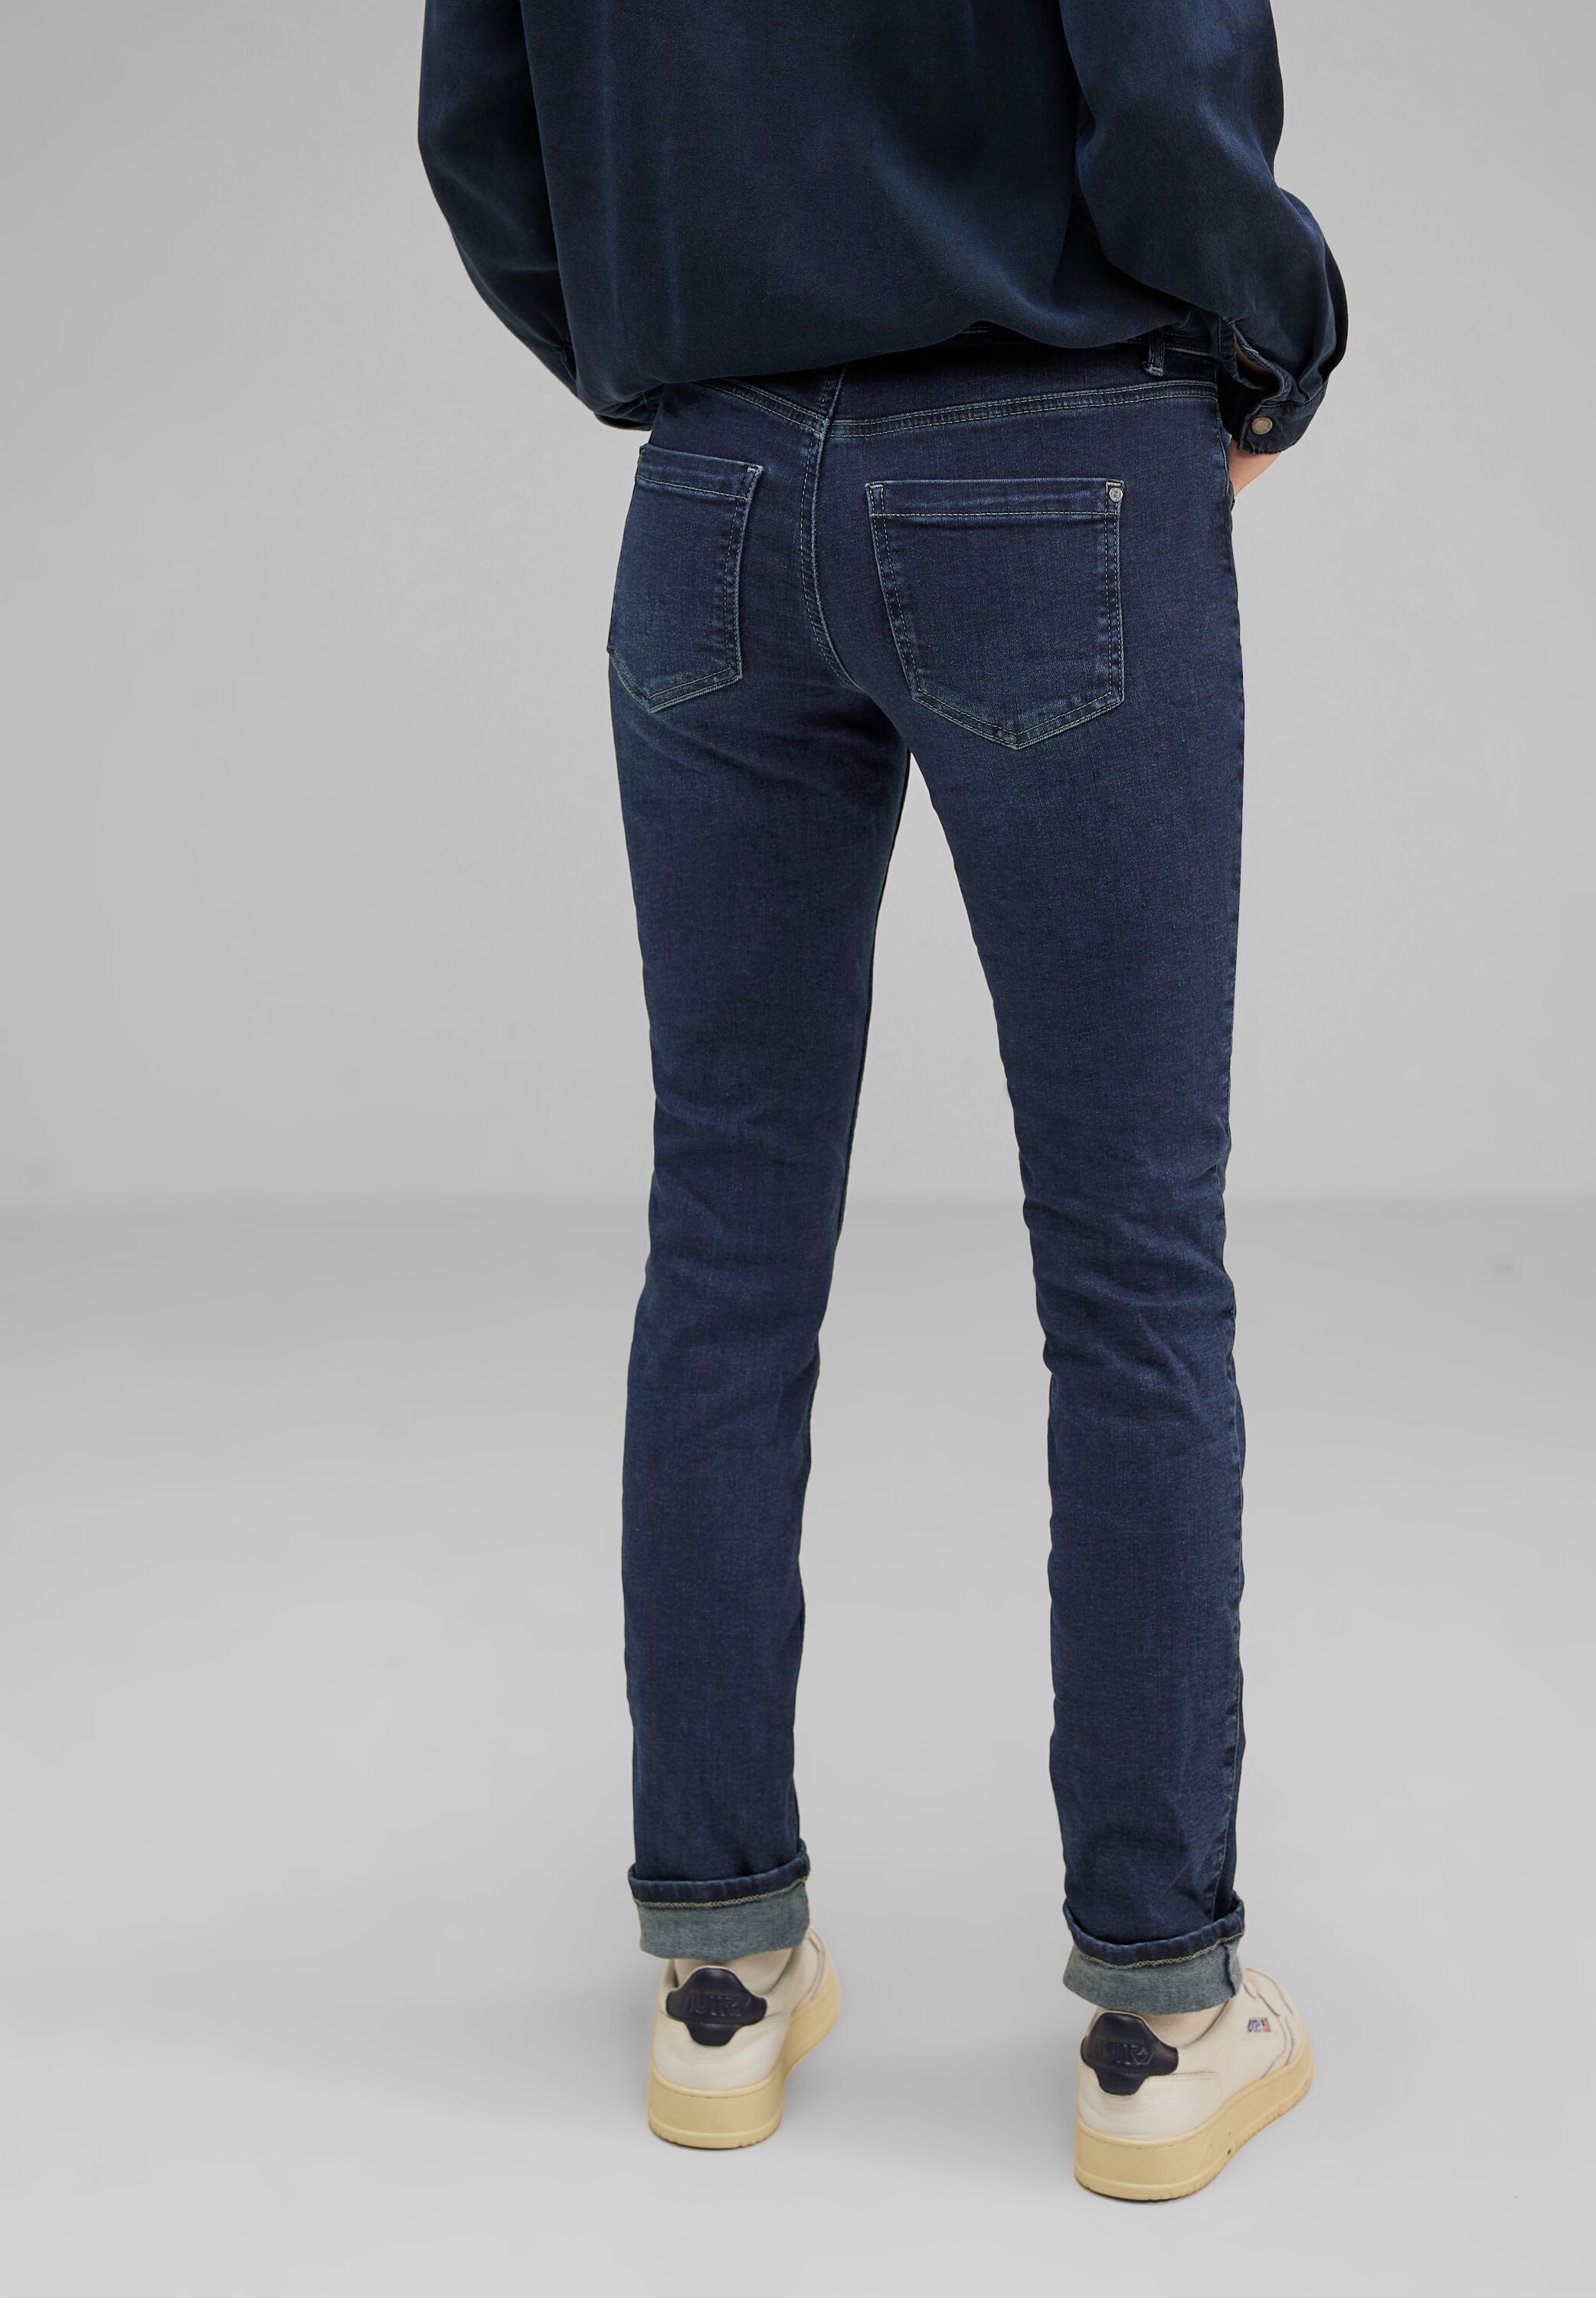 STREET Thermo-Effekt Fit Thermojeans | Wärmender »Casual Style BAUR Thermojeans kaufen ONE Jane«,